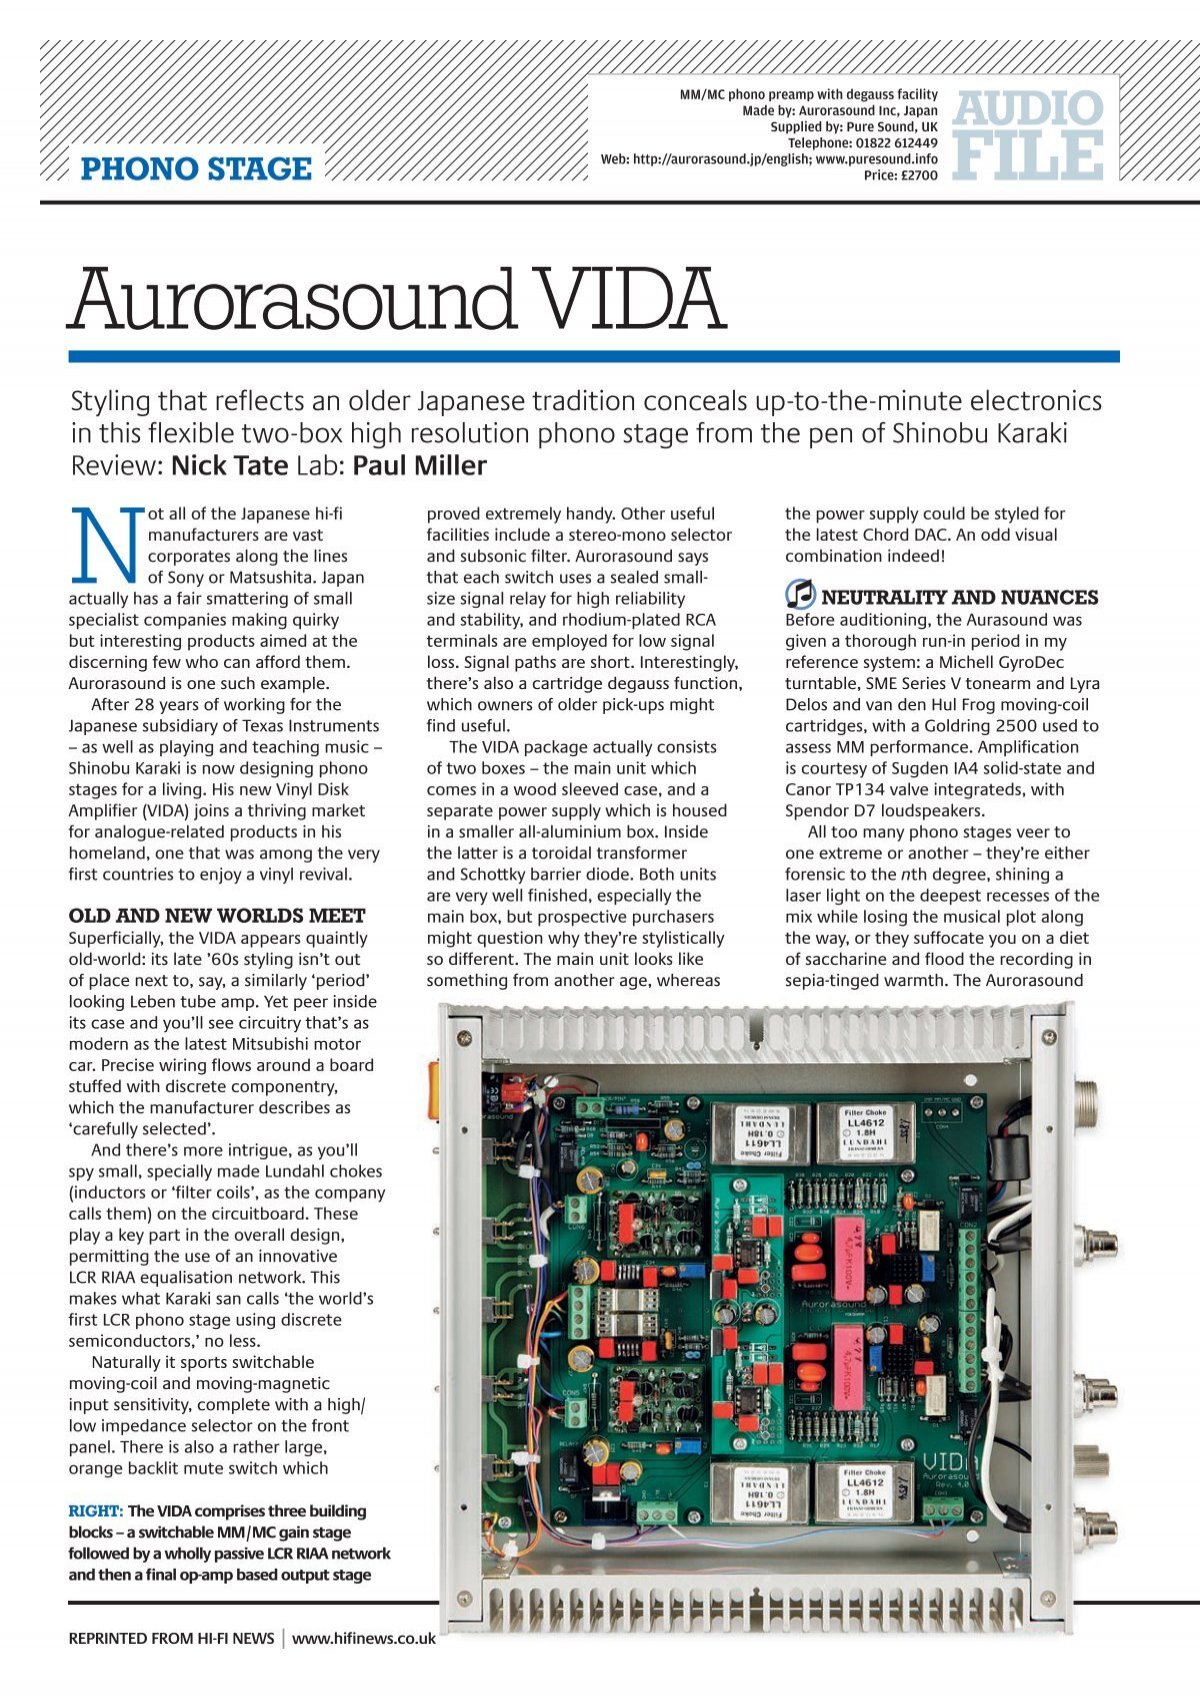 Read the entire review - highend-electronics